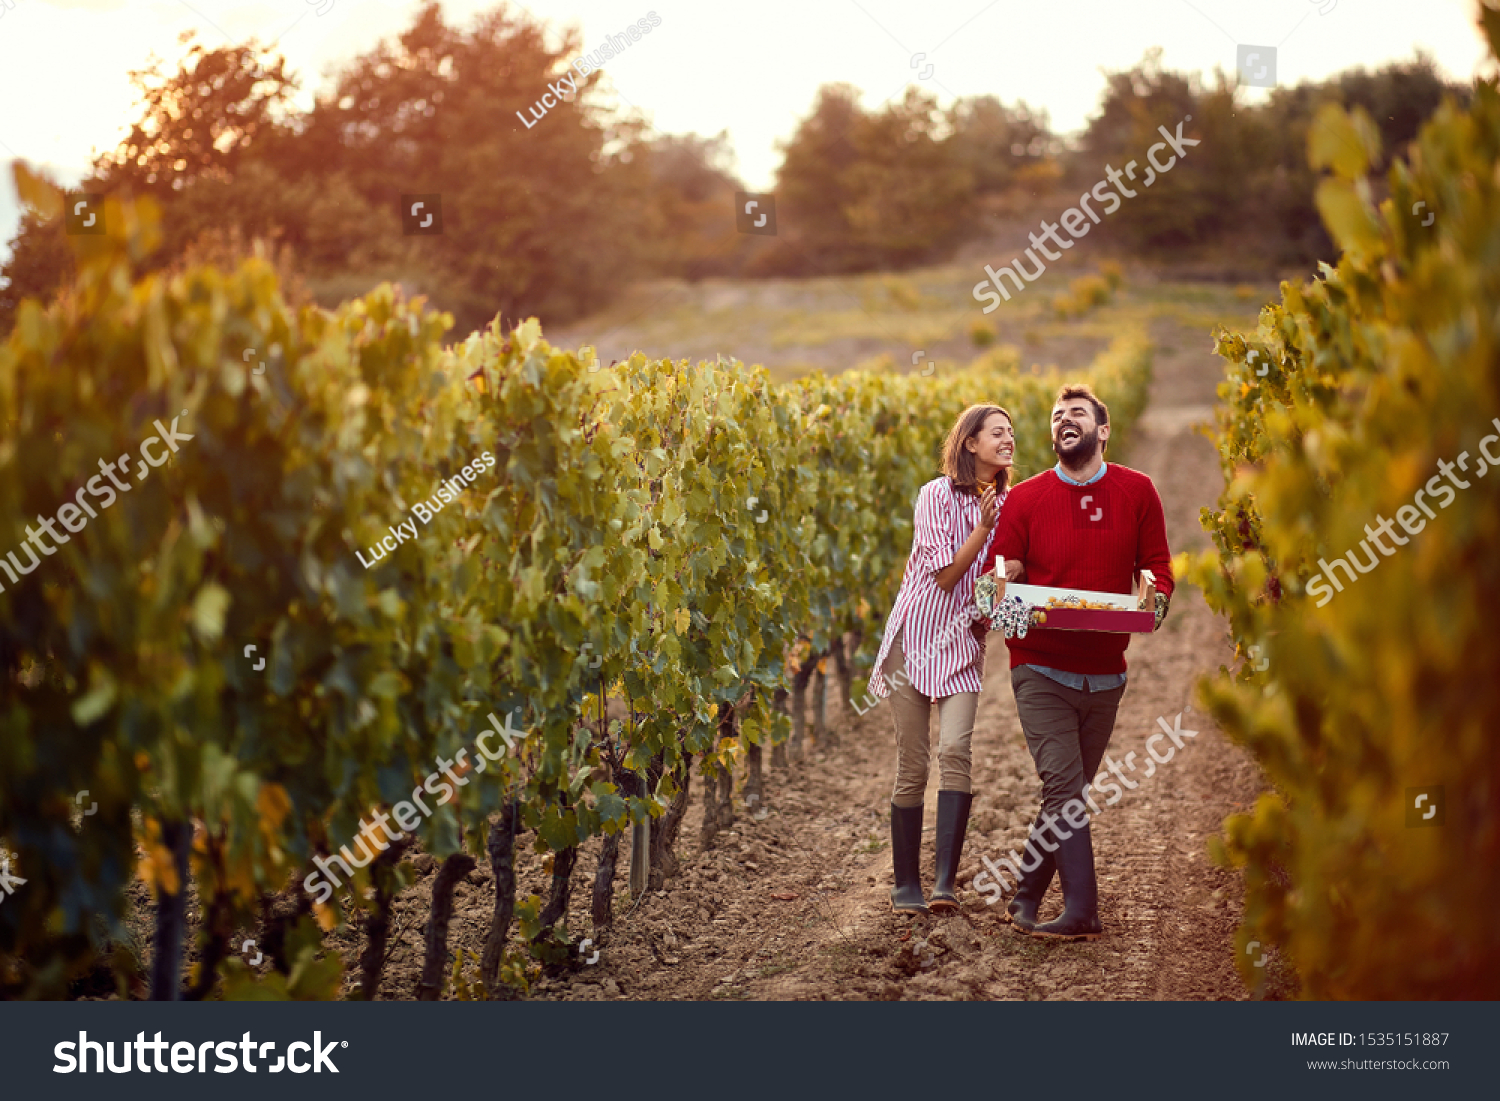 Wine and grapes. Smiling Man and woman winemakers walking in between rows of vines. #1535151887